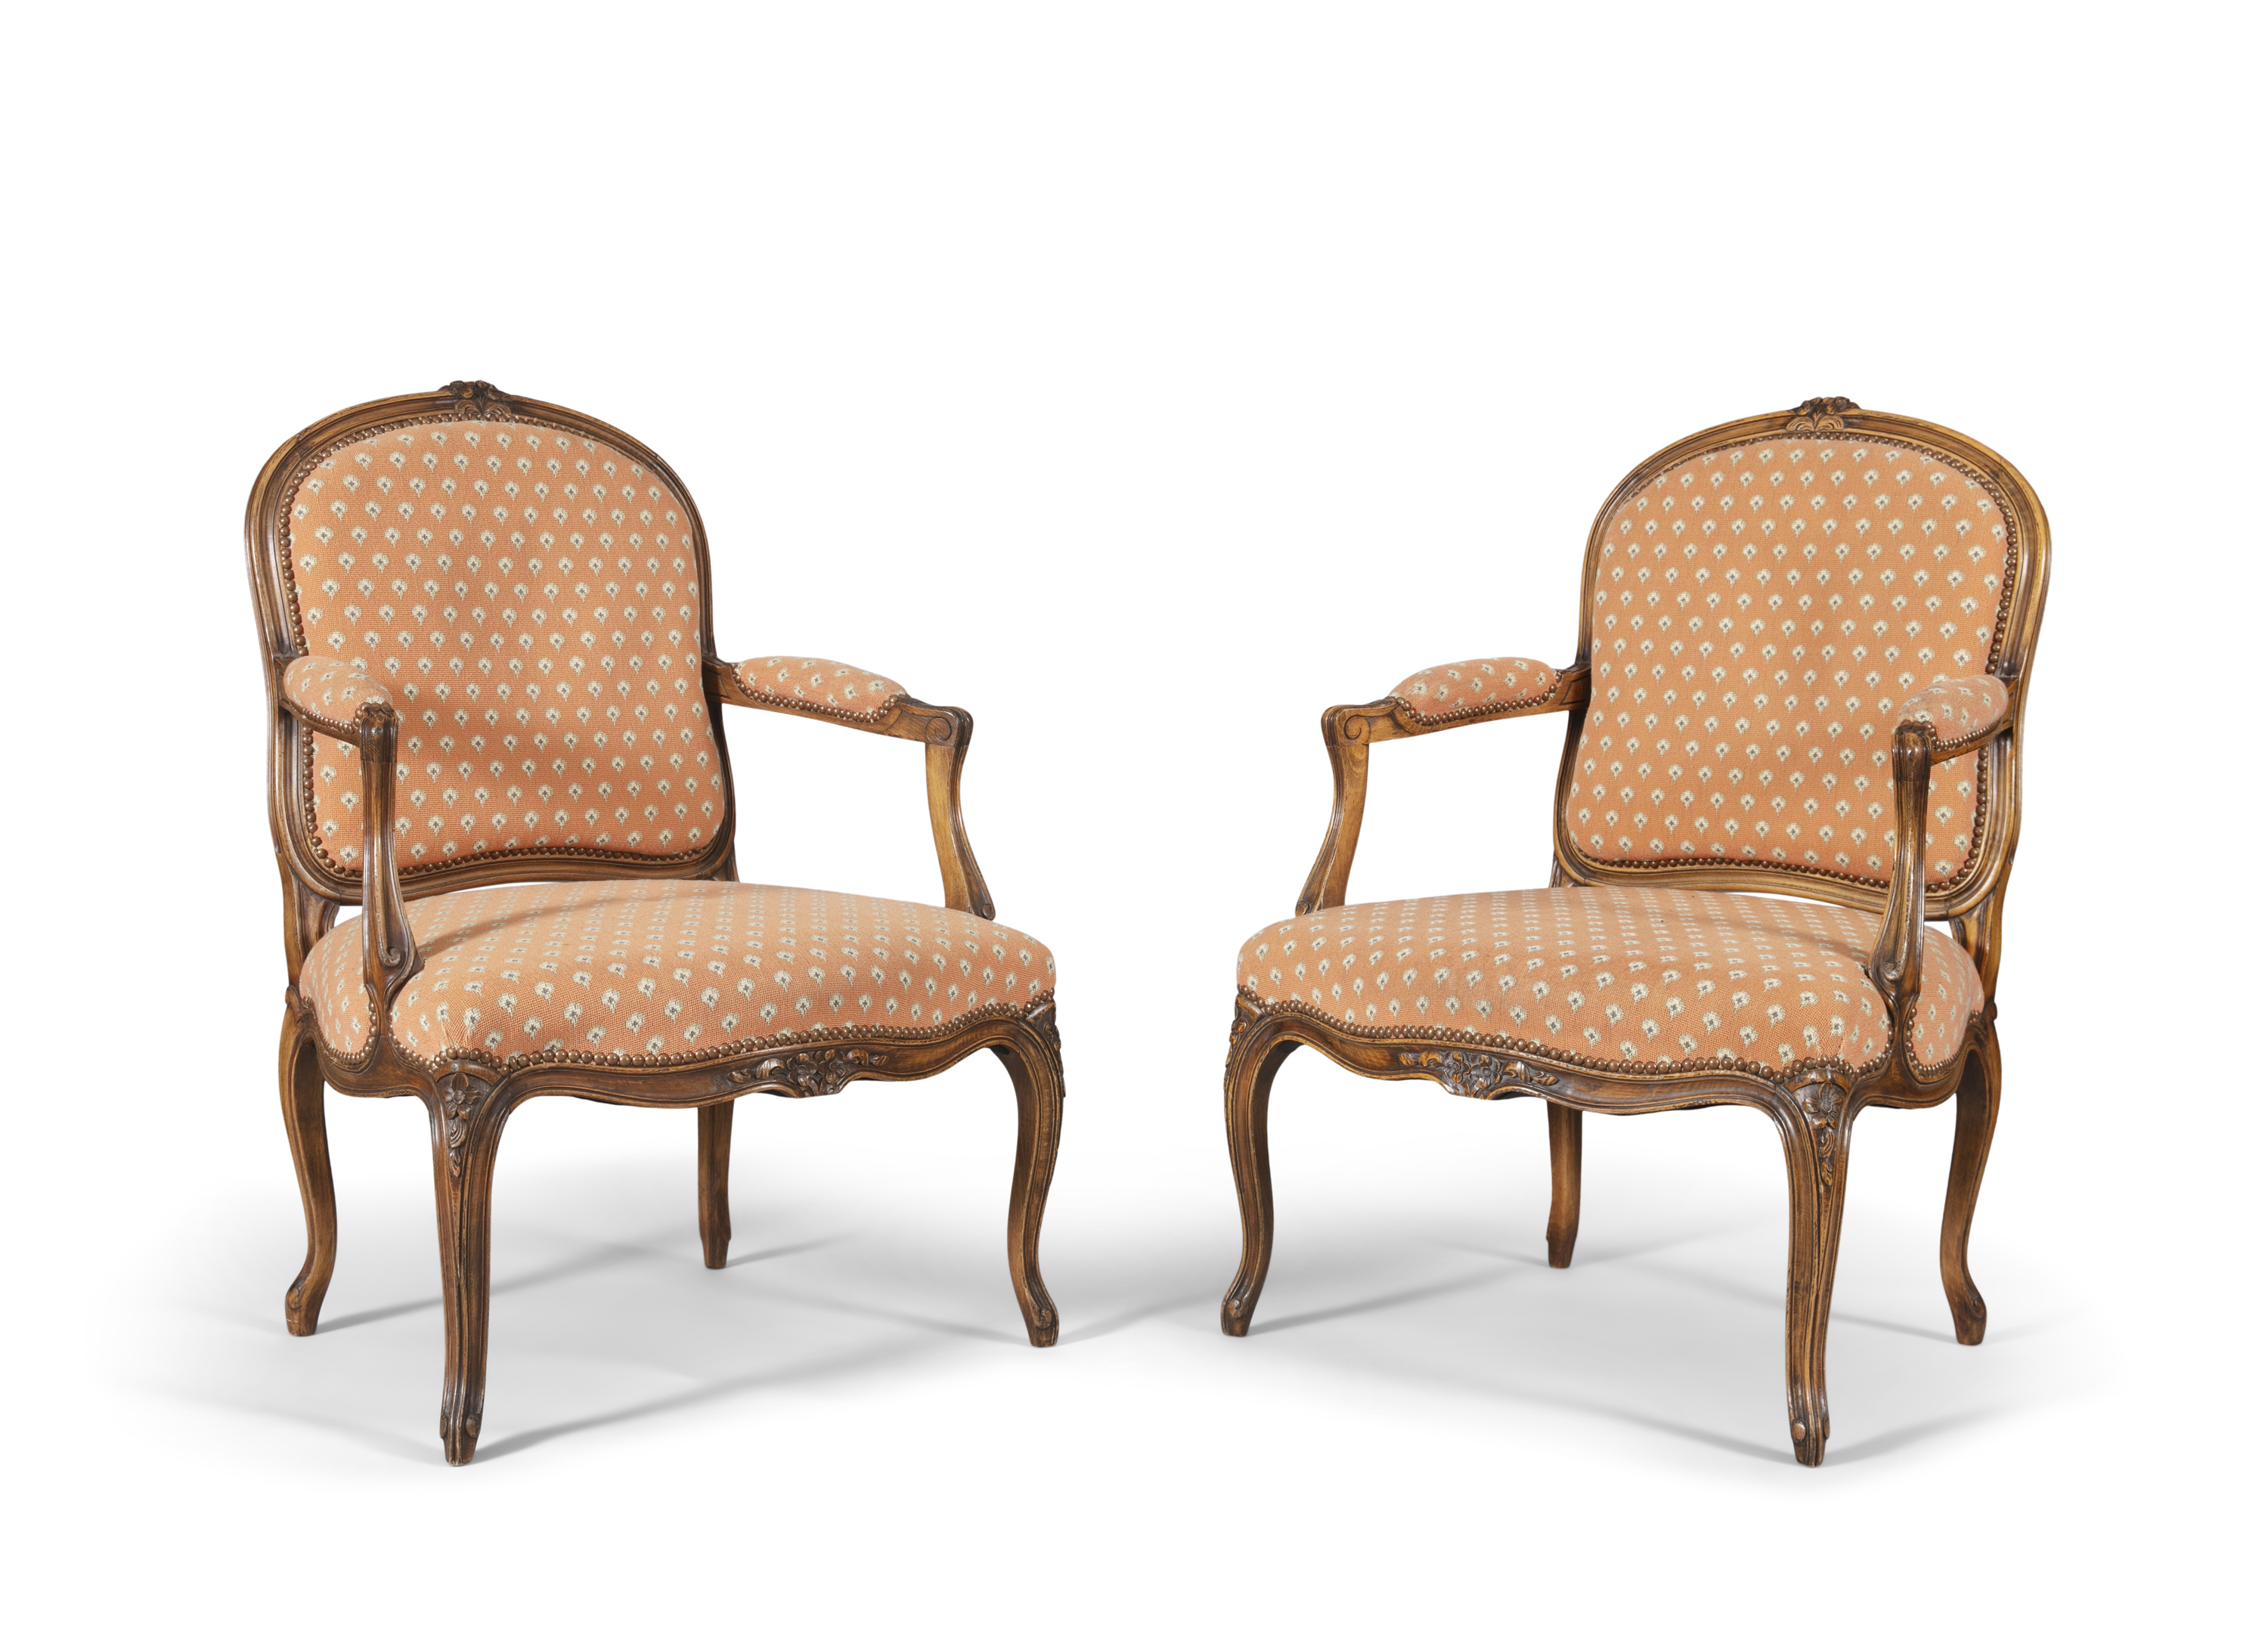 A pair of Louis Quinze style stained beech framed fauteuils, the moulded frame surmounted with